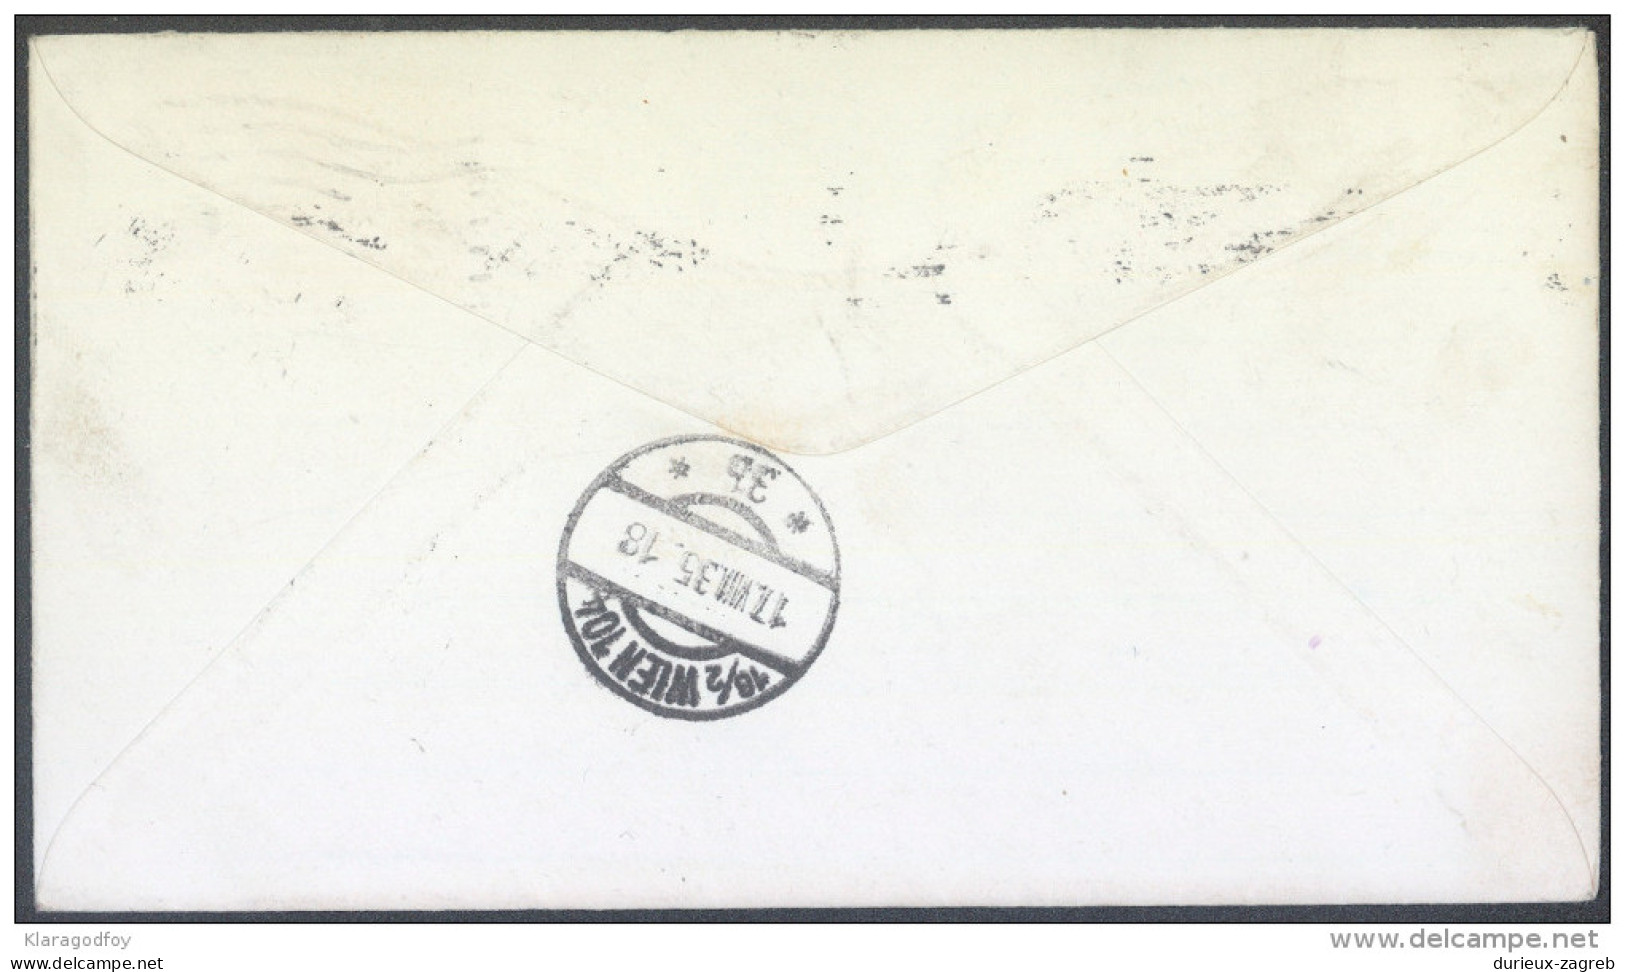 United States 3c Postal Stationery Letter Cover Travelled 1935 Rockdale, TX To Austria Bb - 1921-40